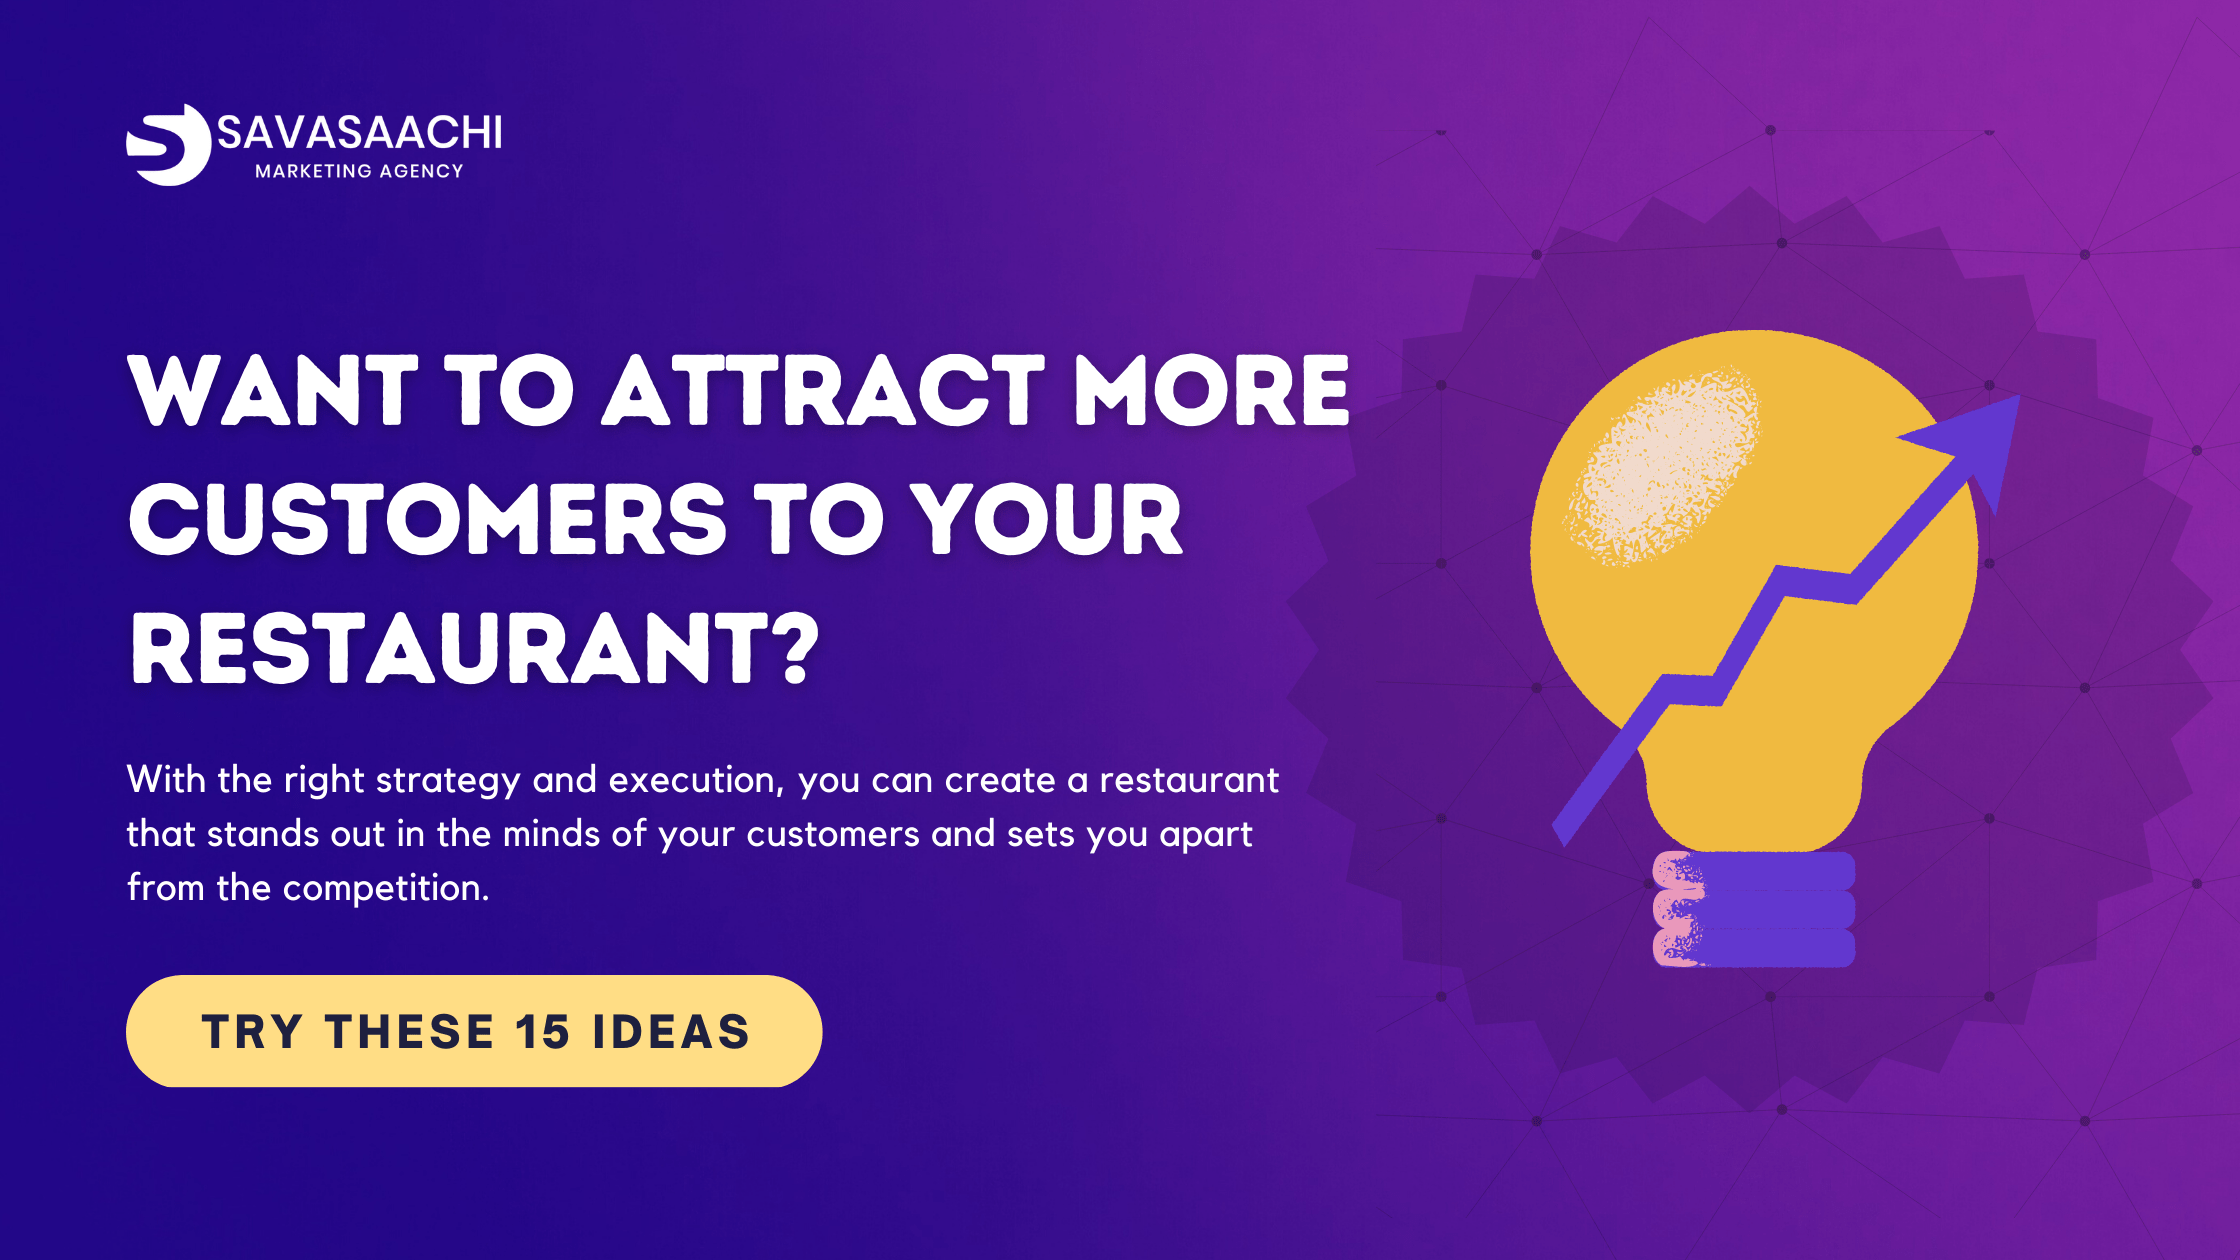 15 Innovative Ideas to Make Your Restaurant Stand Out - Savasaachi